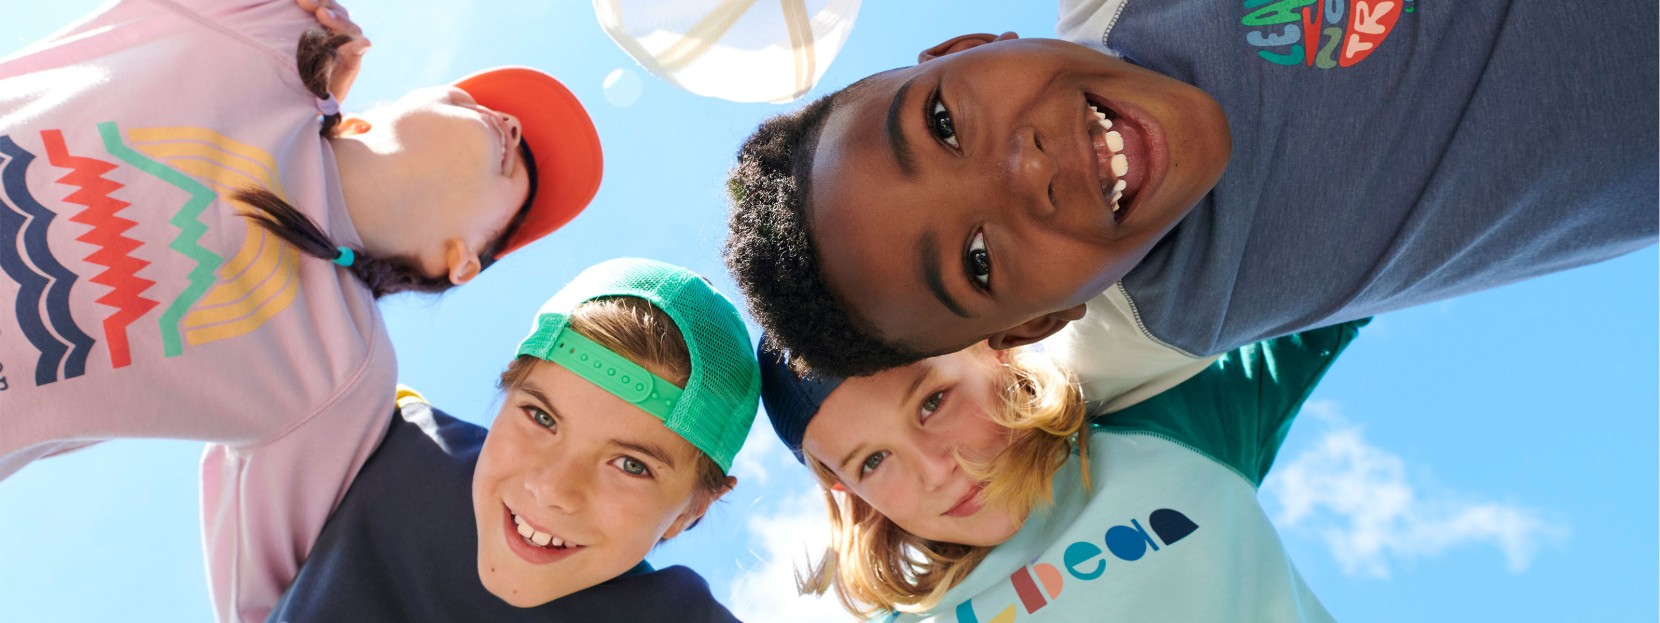 4 smiling kids in a huddle, shot from below looking up at faces and blue sky.